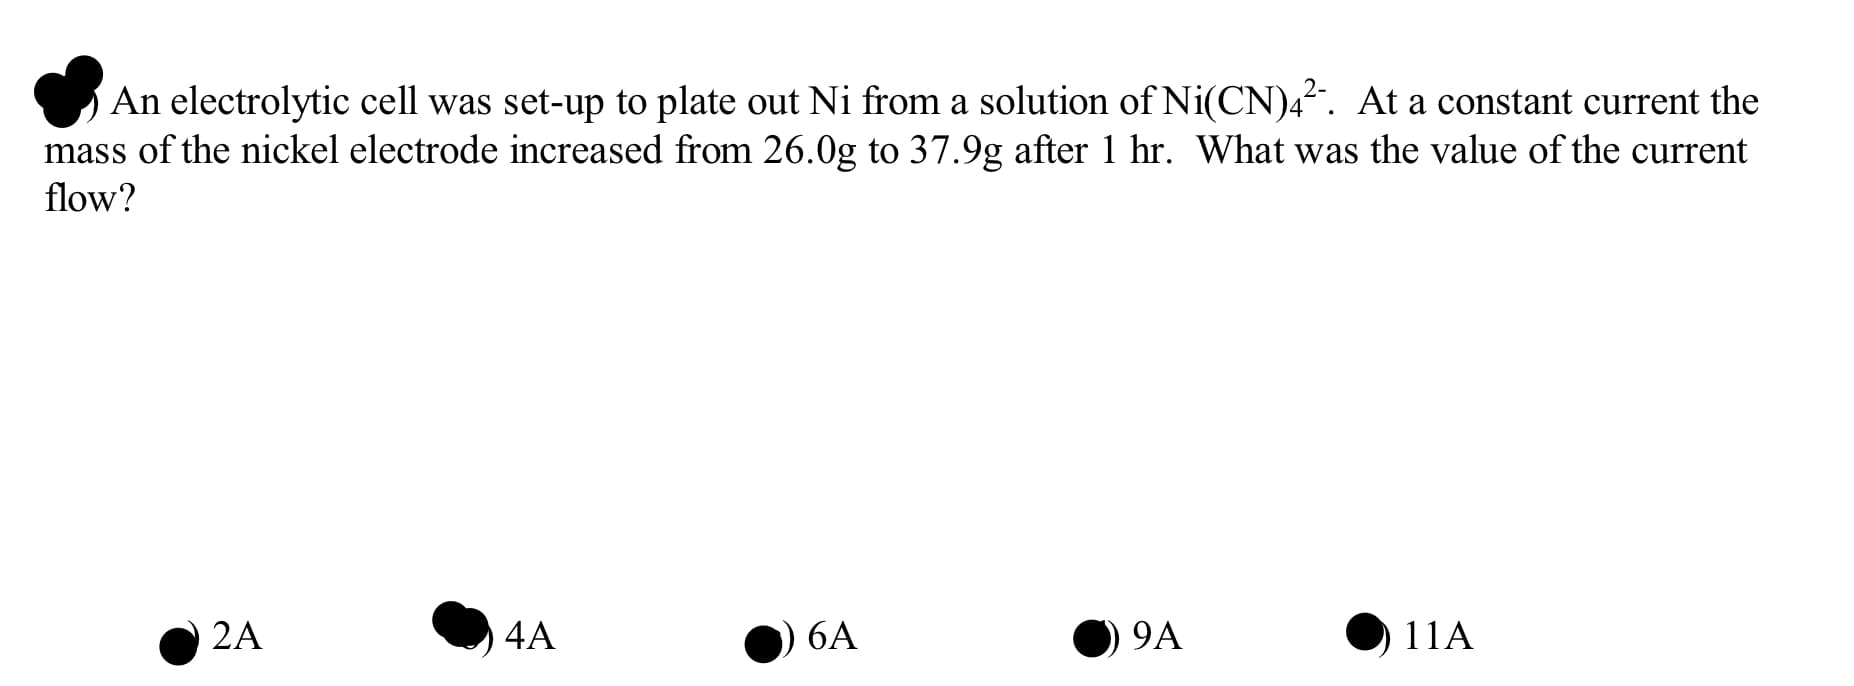 An electrolytic cell was set-up to plate out Ni from a solution of Ni(CN)4?. At a constant current the
mass of the nickel electrode increased from 26.0g to 37.9g after 1 hr. What was the value of the current
flow?
2A
4A
6A
9A
11A
